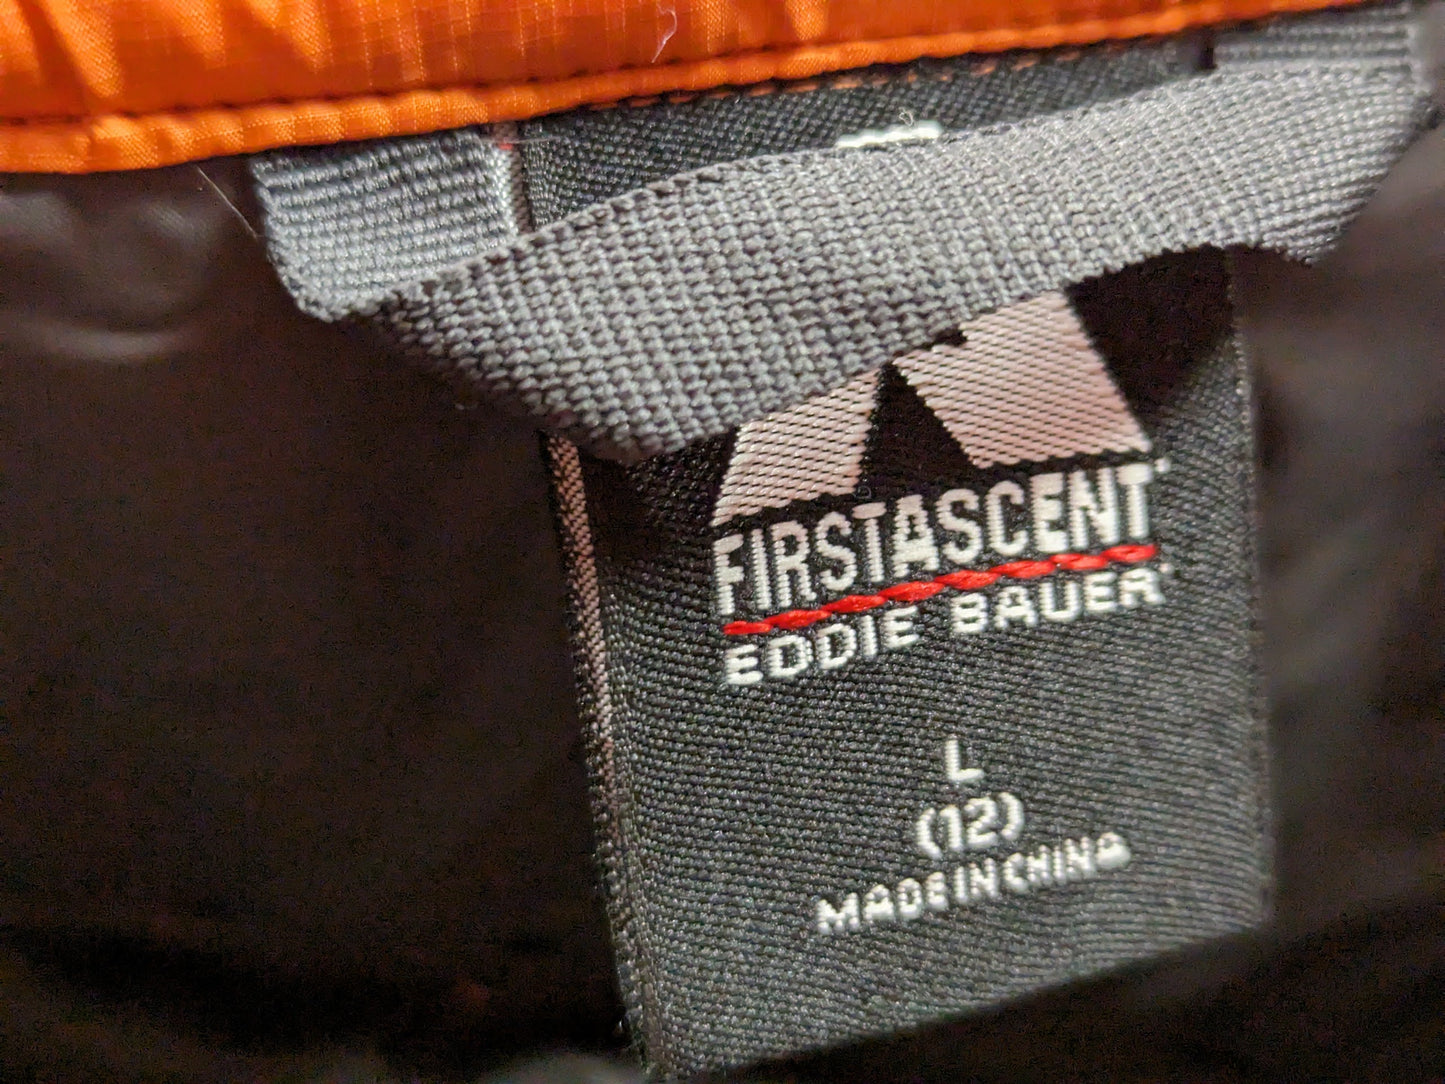 Eddie Bauer First Ascent Youth Puffer Vest Size Youth Large Color Orange Condition Used